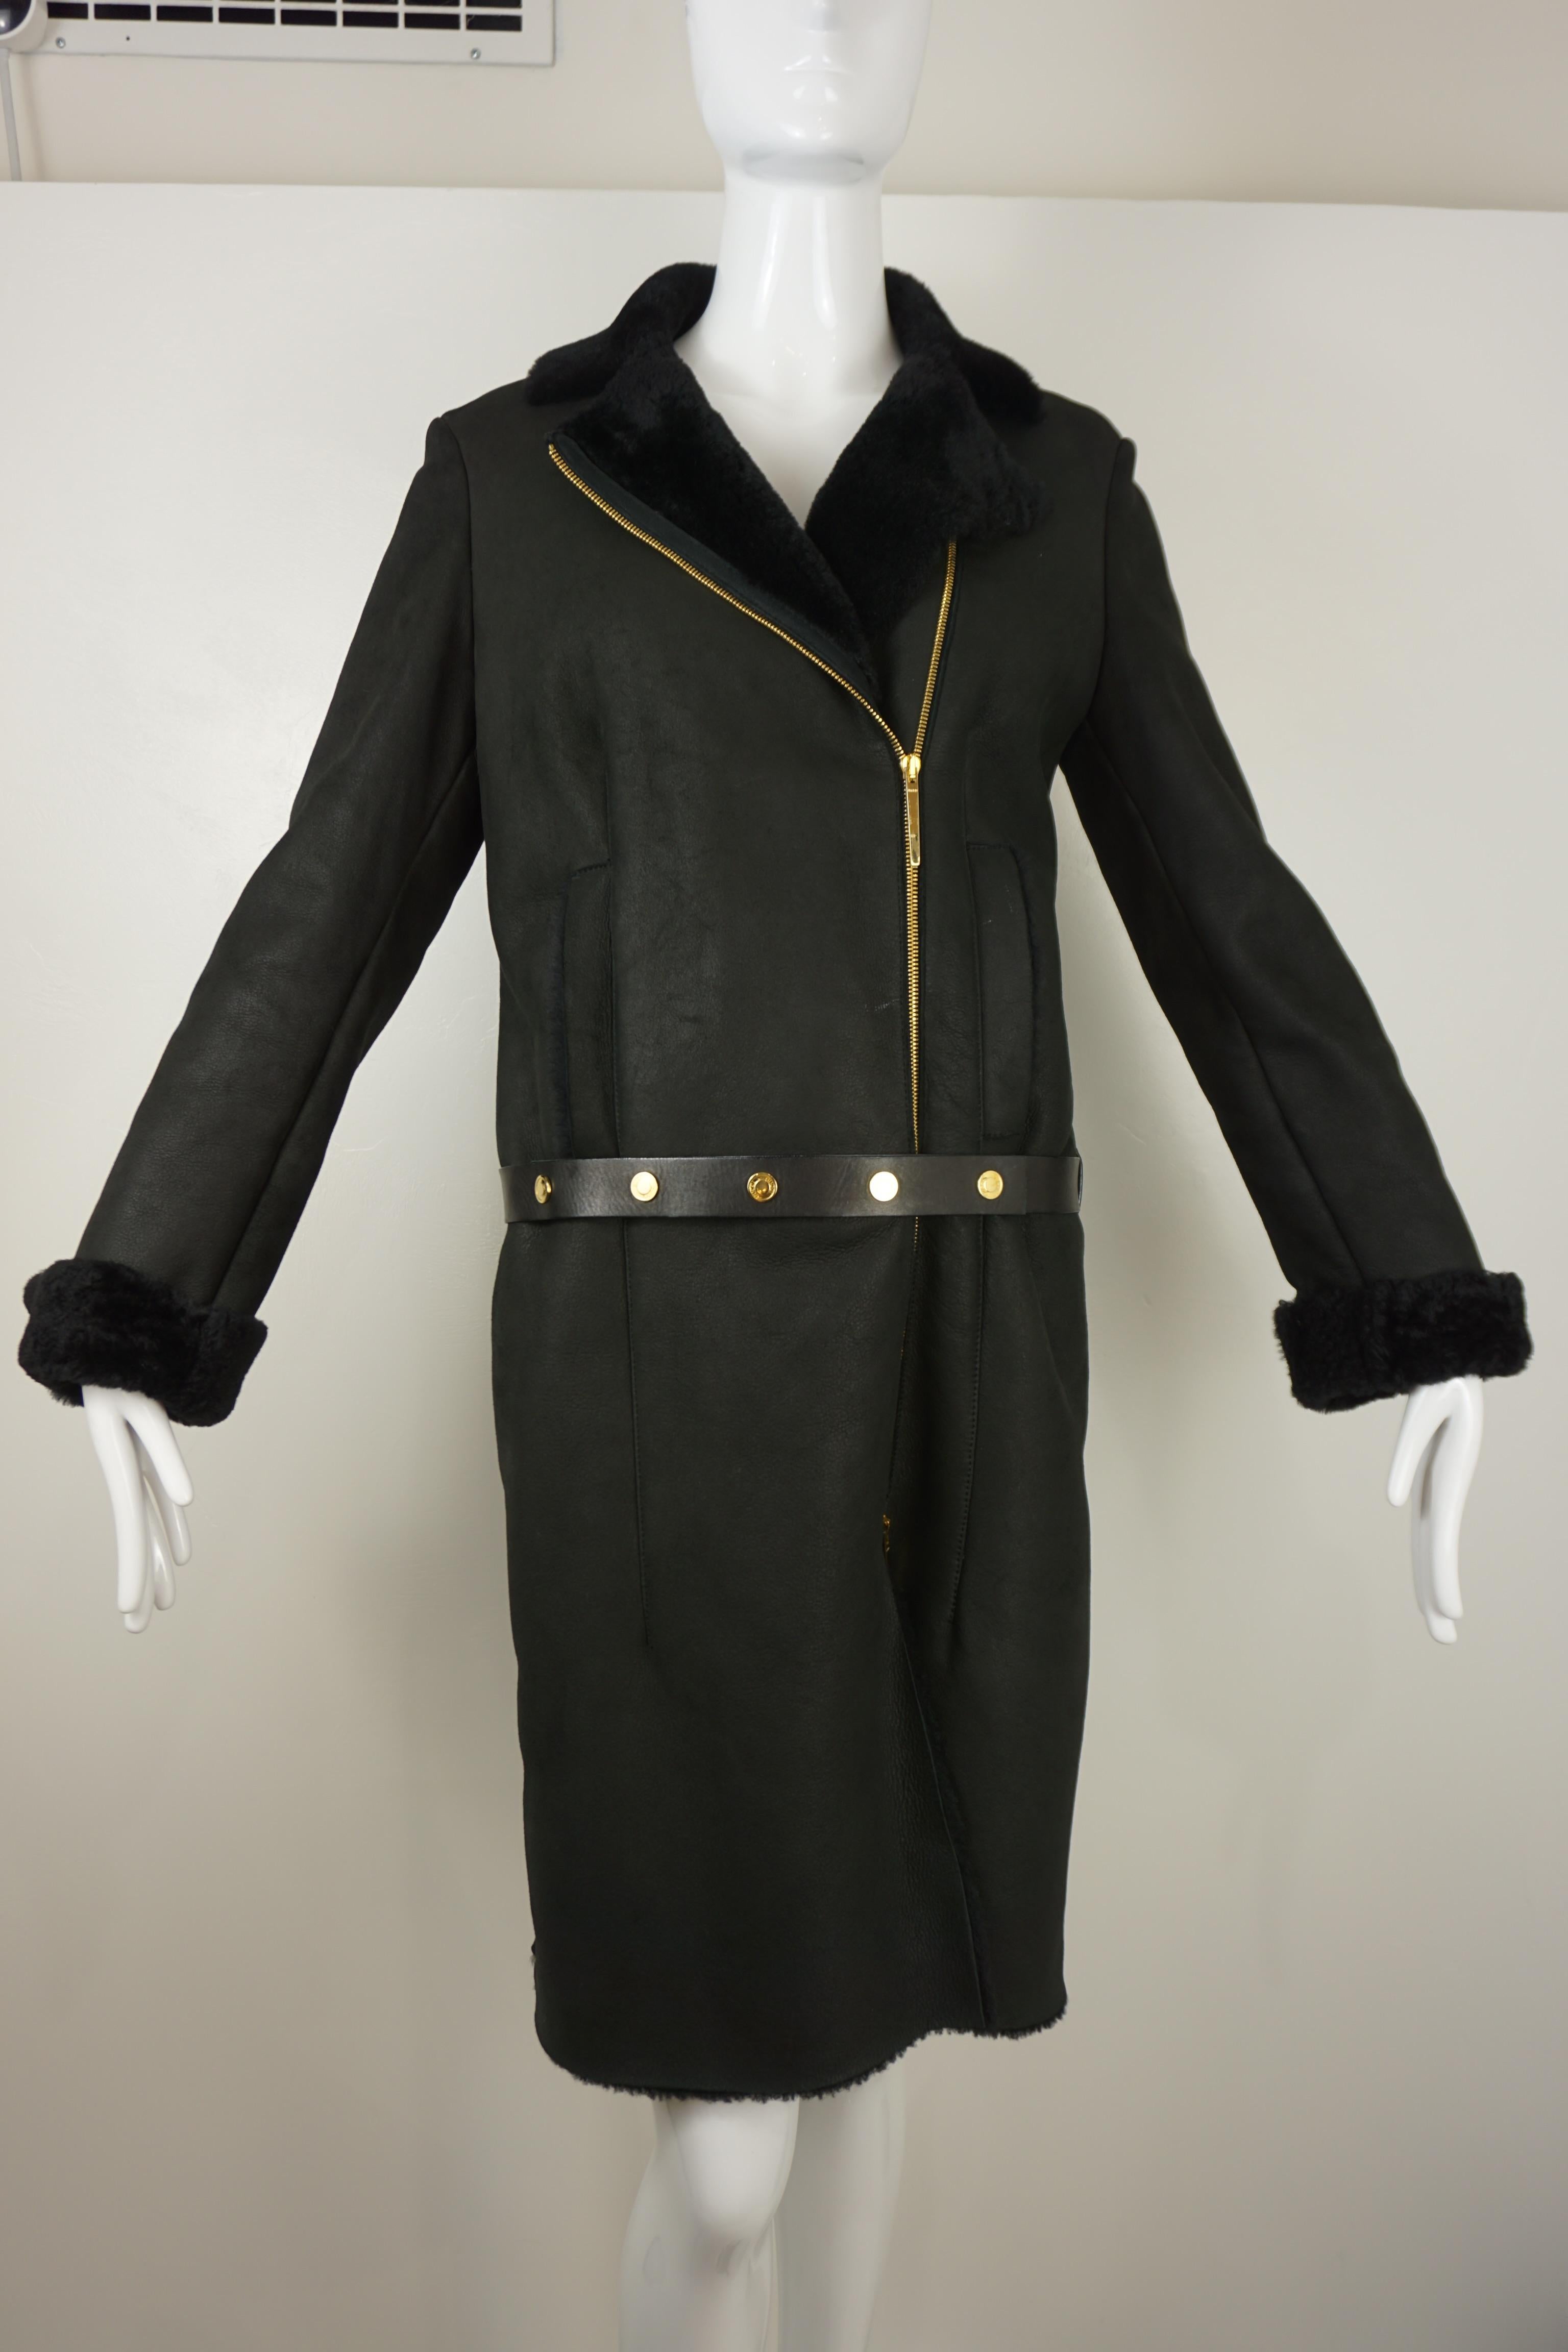 Tom Ford Gucci Black Shearling Coat In Excellent Condition For Sale In Carmel, CA